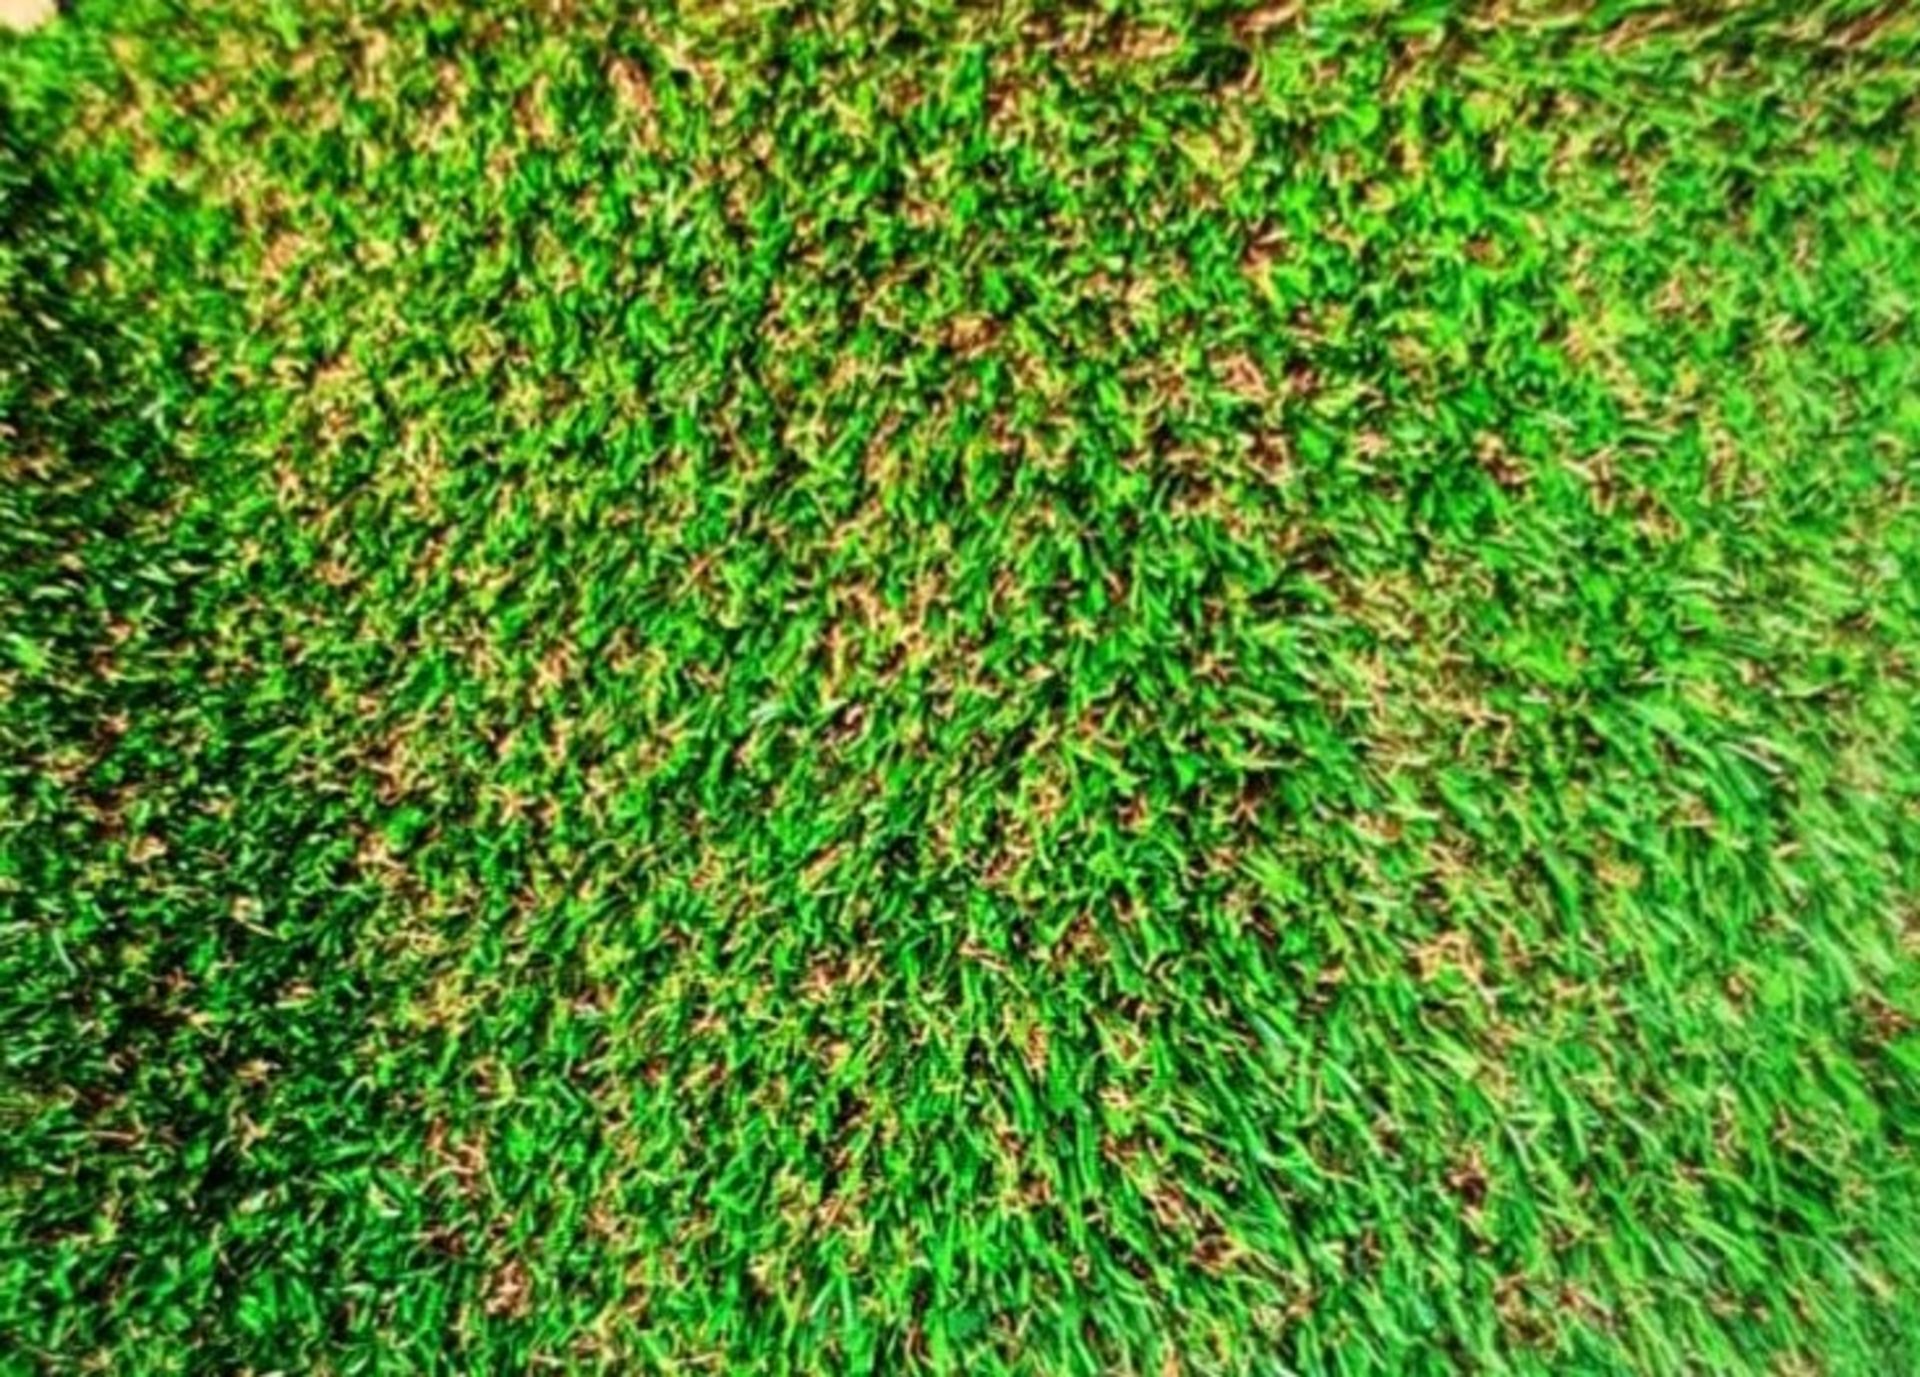 25m Long Roll of High Quality 30mm Depth Artificial Grass (50m2 coverage per roll) made by Sungrass - Image 2 of 4